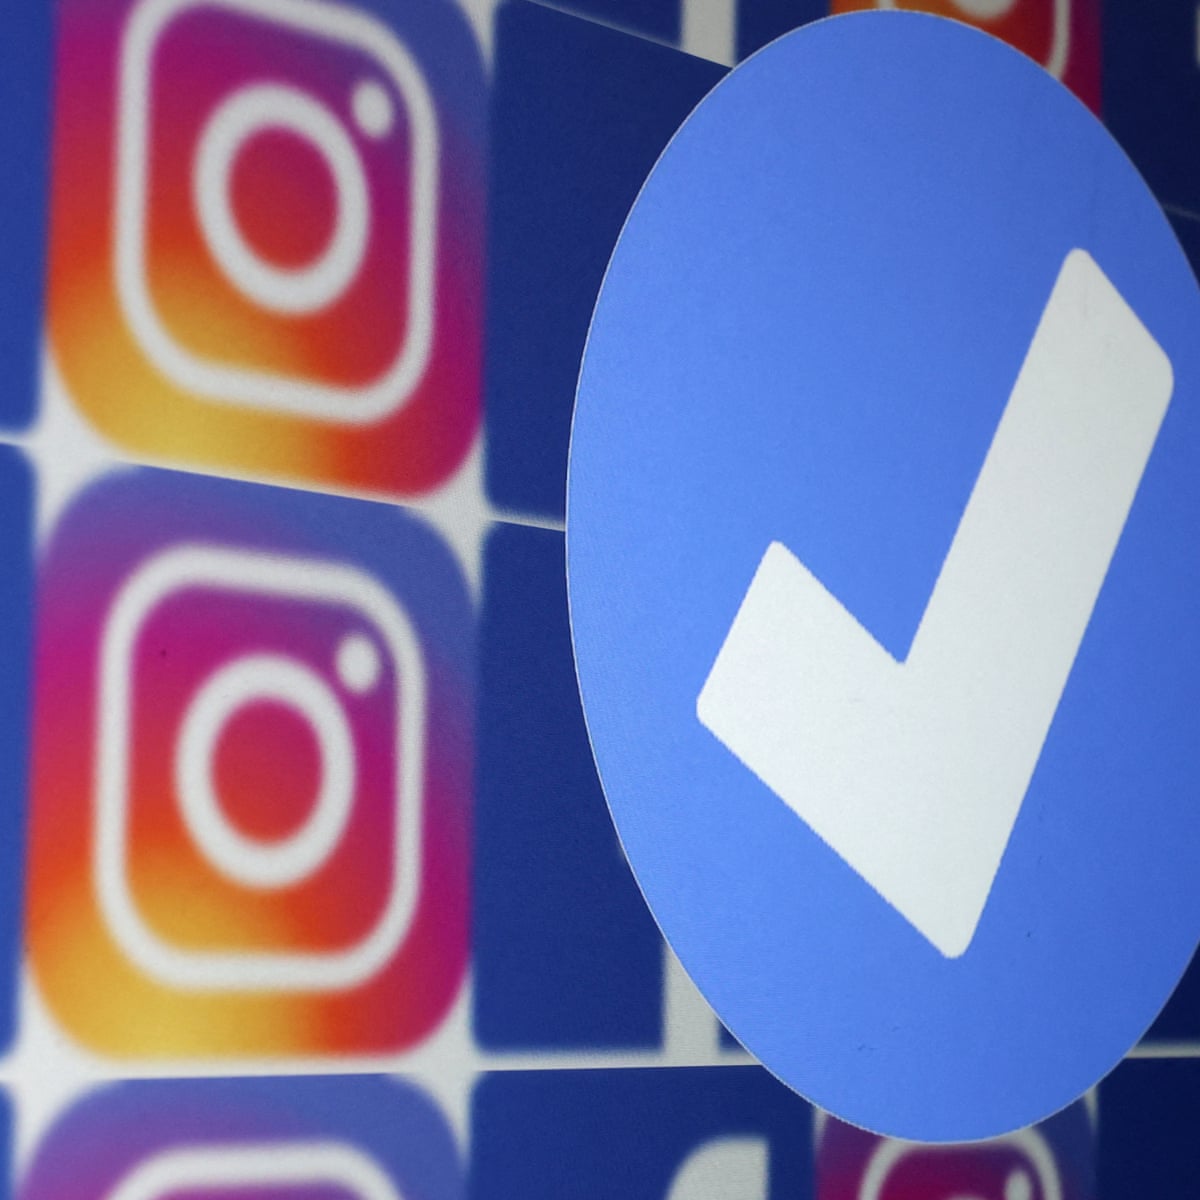 Here's How To Get Blue Tick On Instagram, Now you can get your account  verified on Instagram